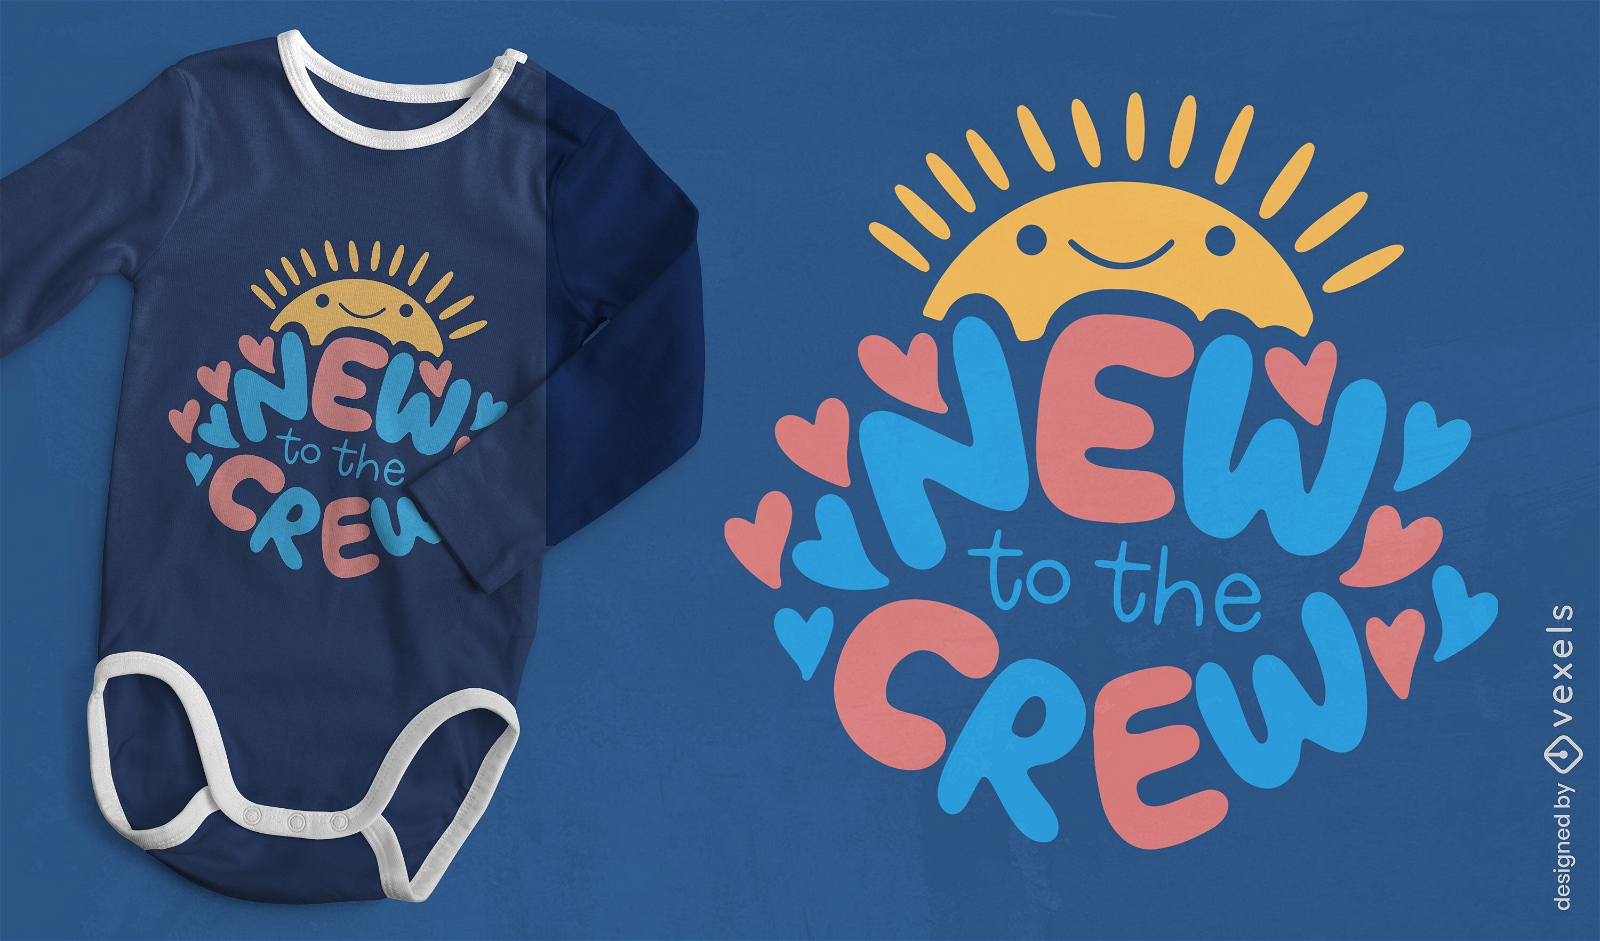 New to the crew baby quote t-shirt design